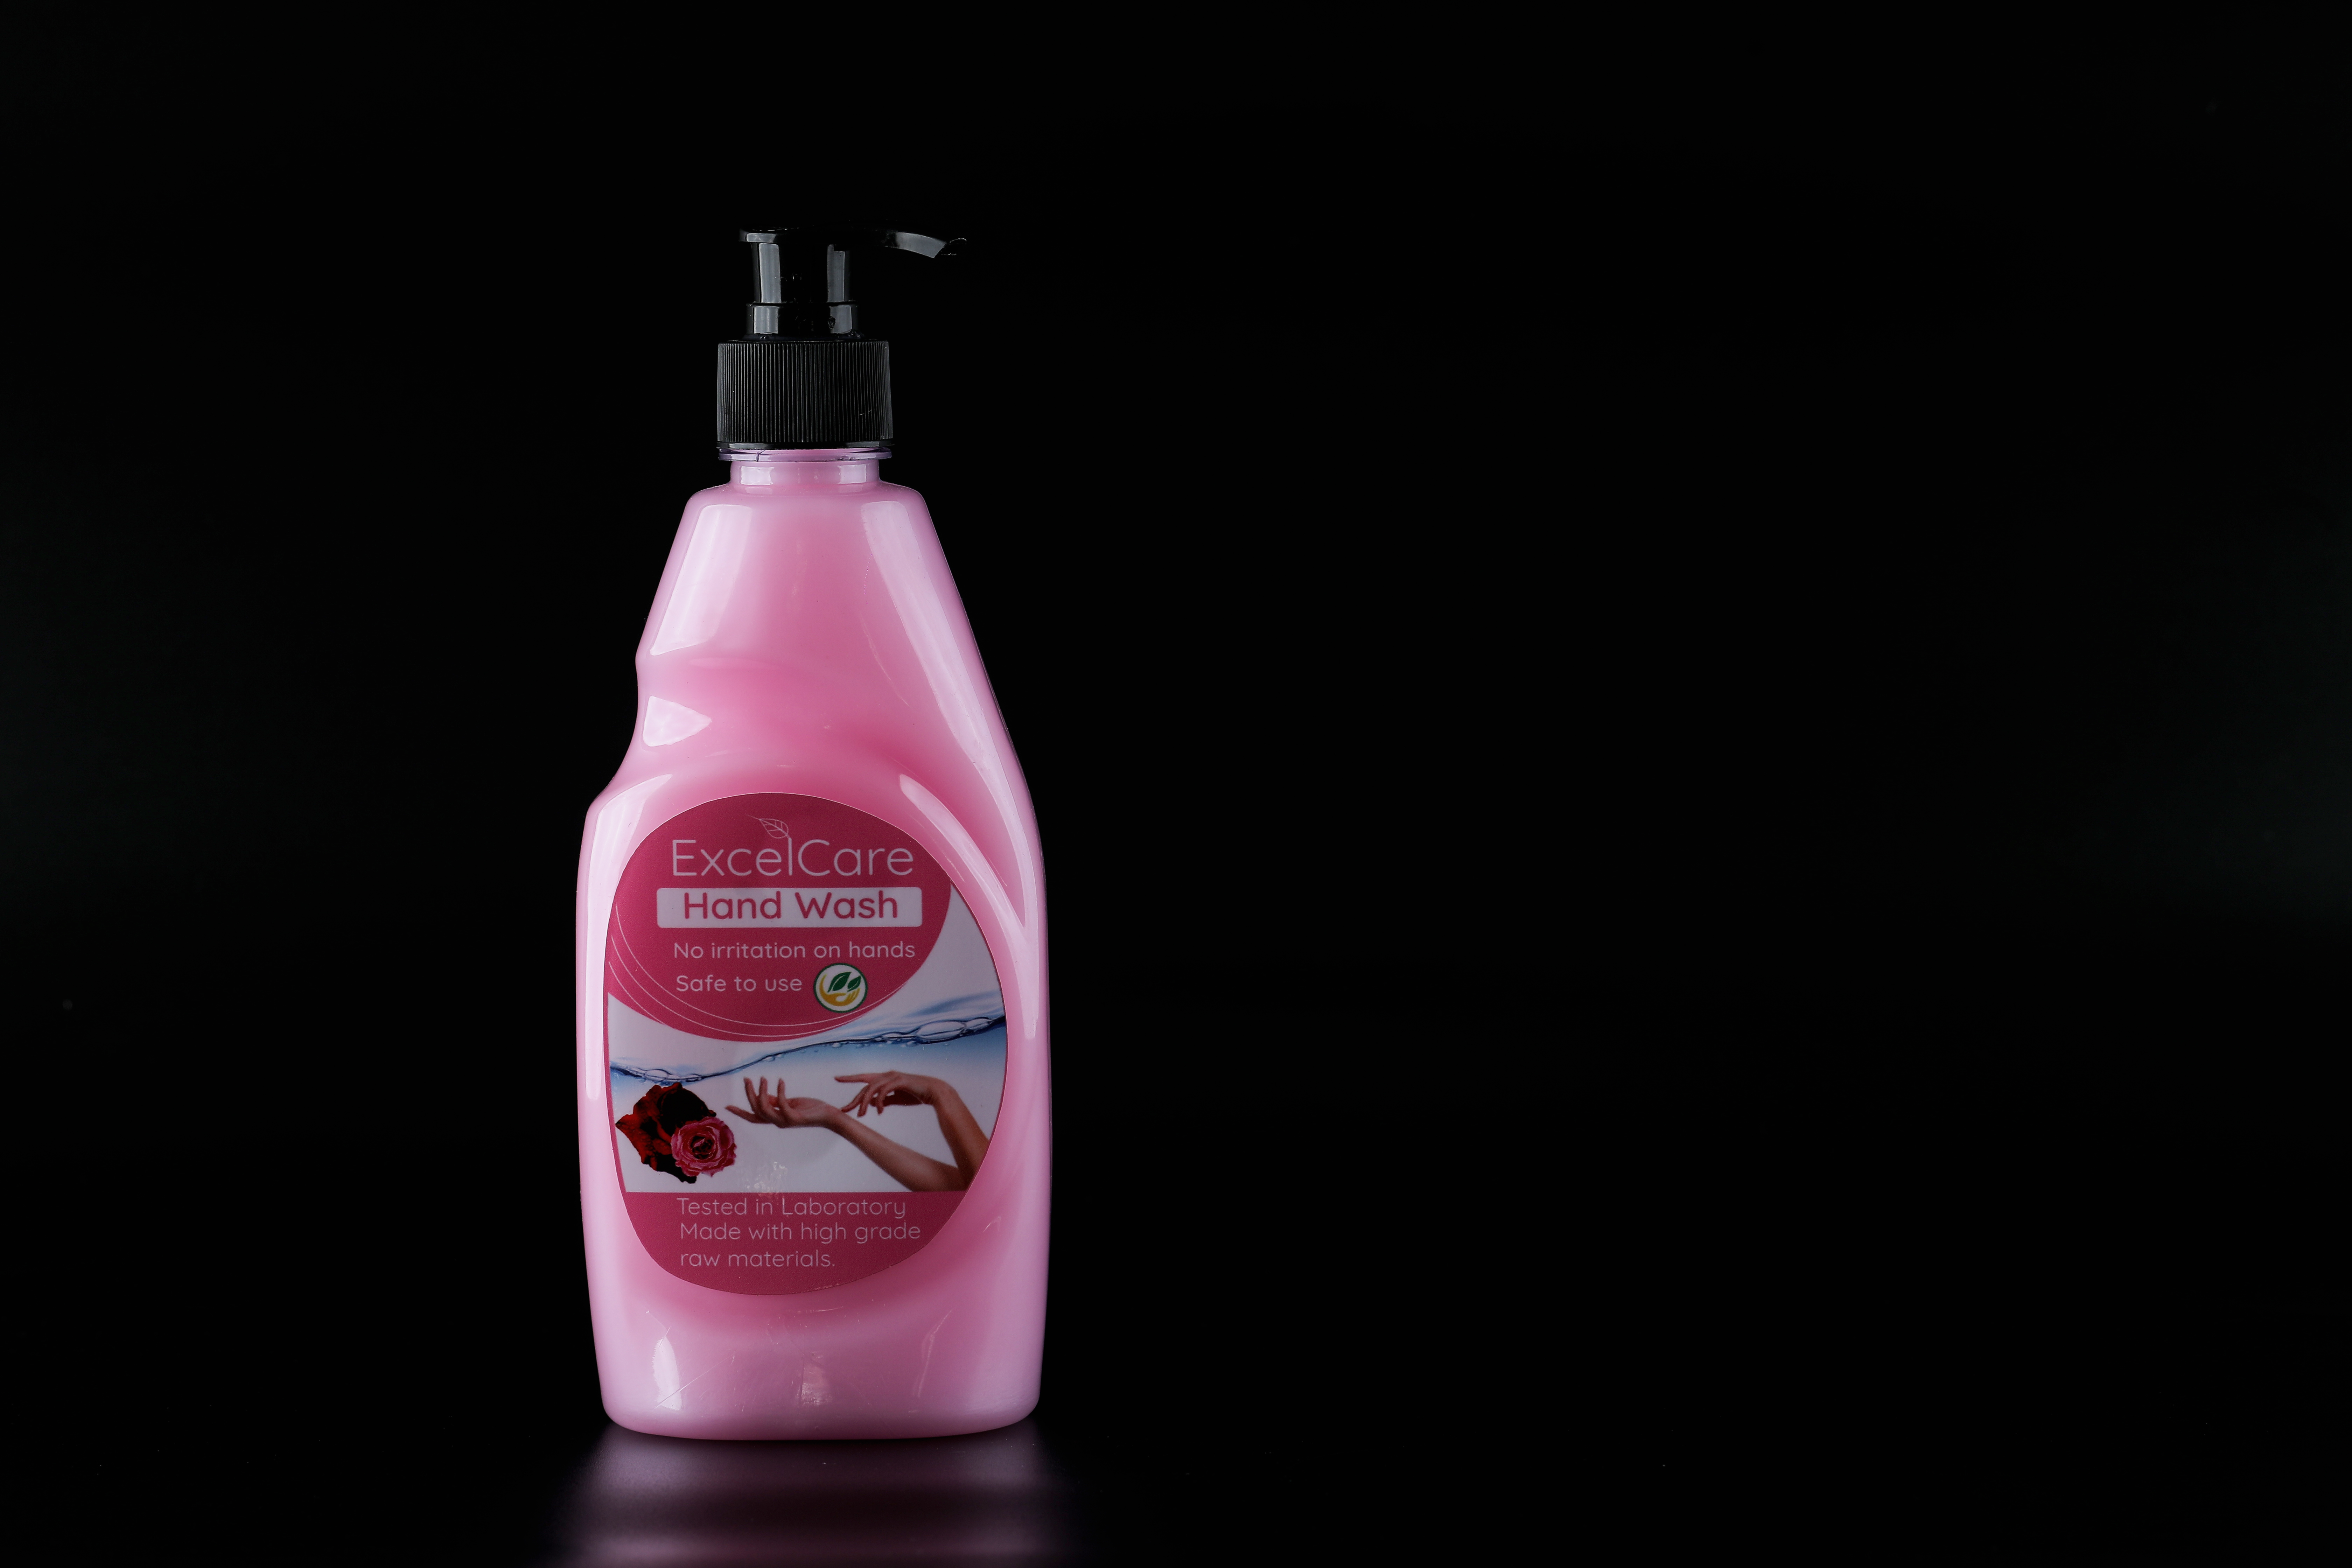 Hand Wash Soap (ExcelCare)